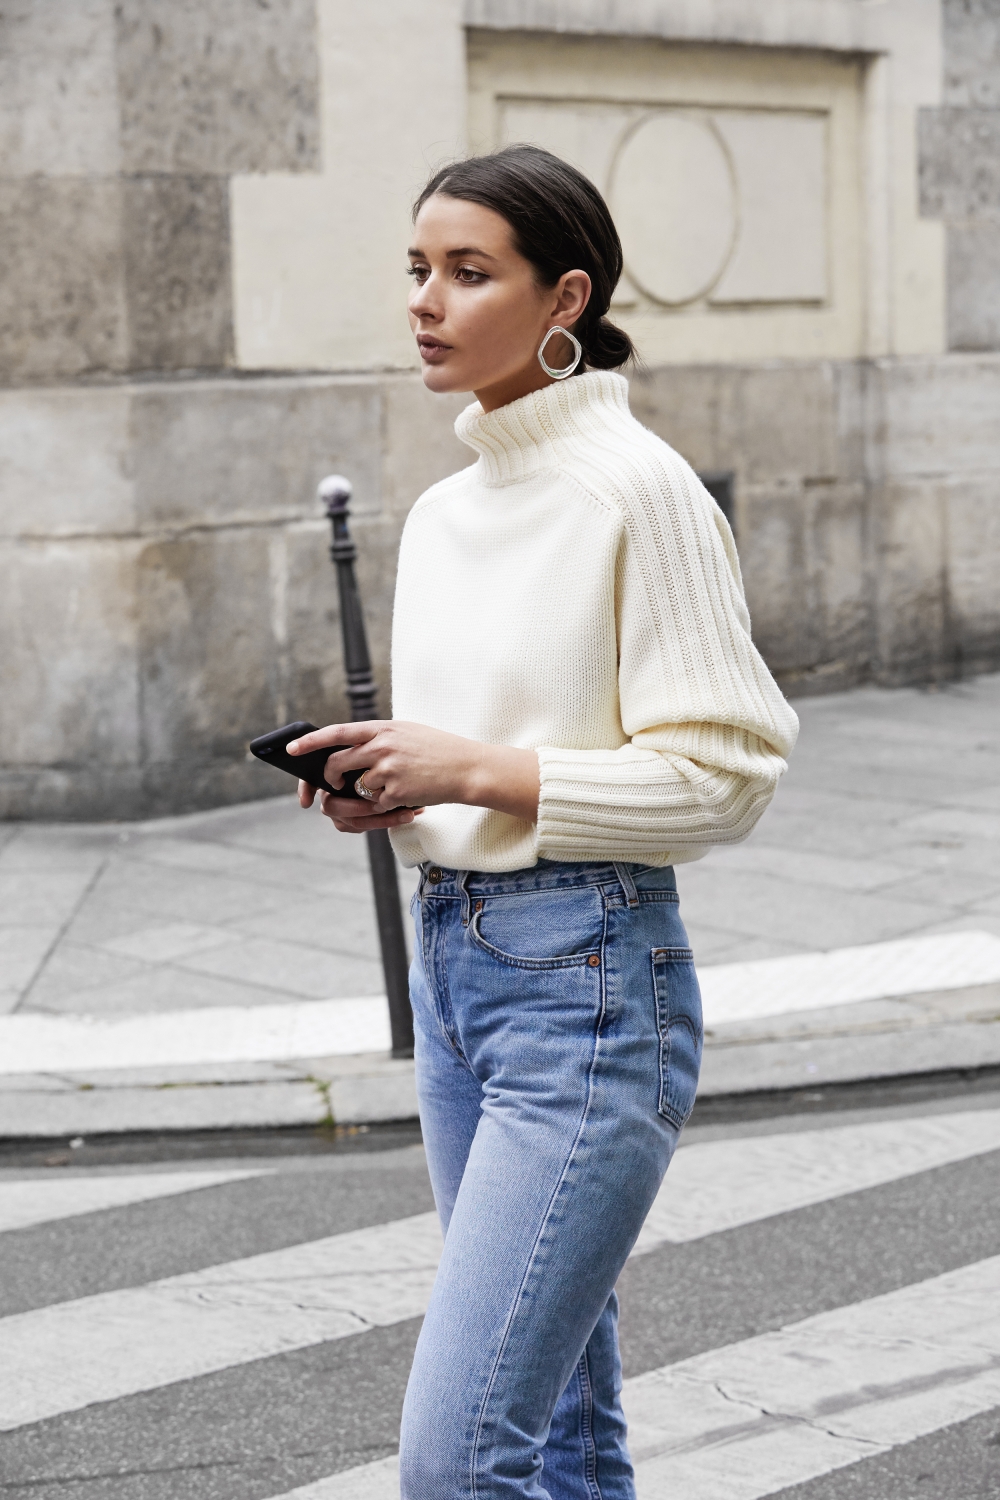 This Stylish Denim Outfit Is a No-Brainer for Winter